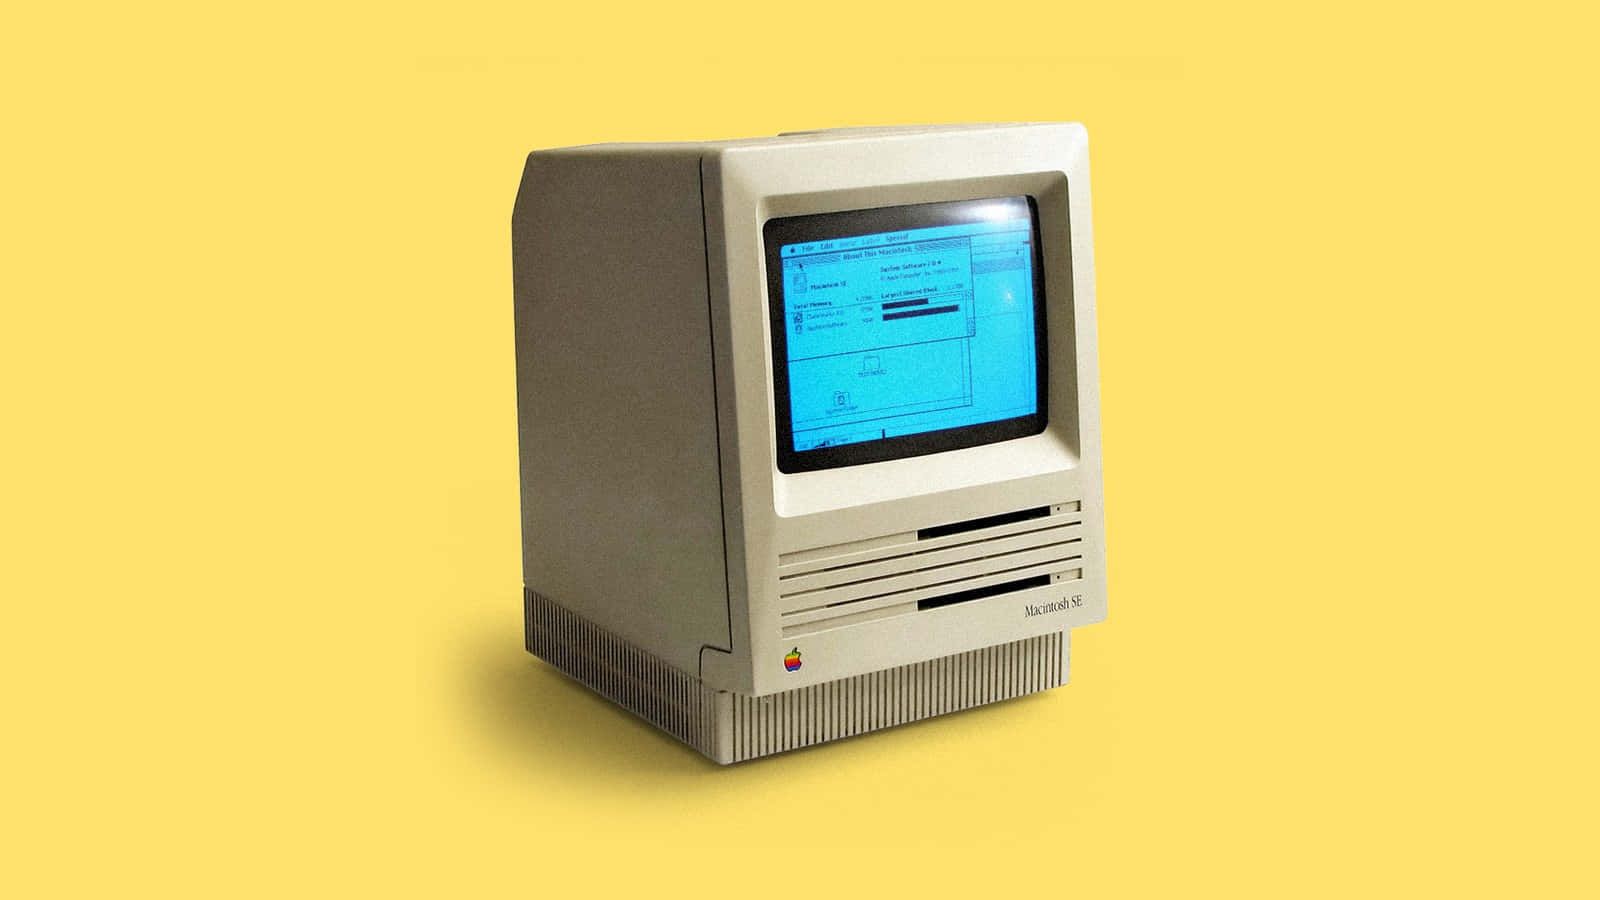 An old computer retrospectively placed in a modern setting Wallpaper